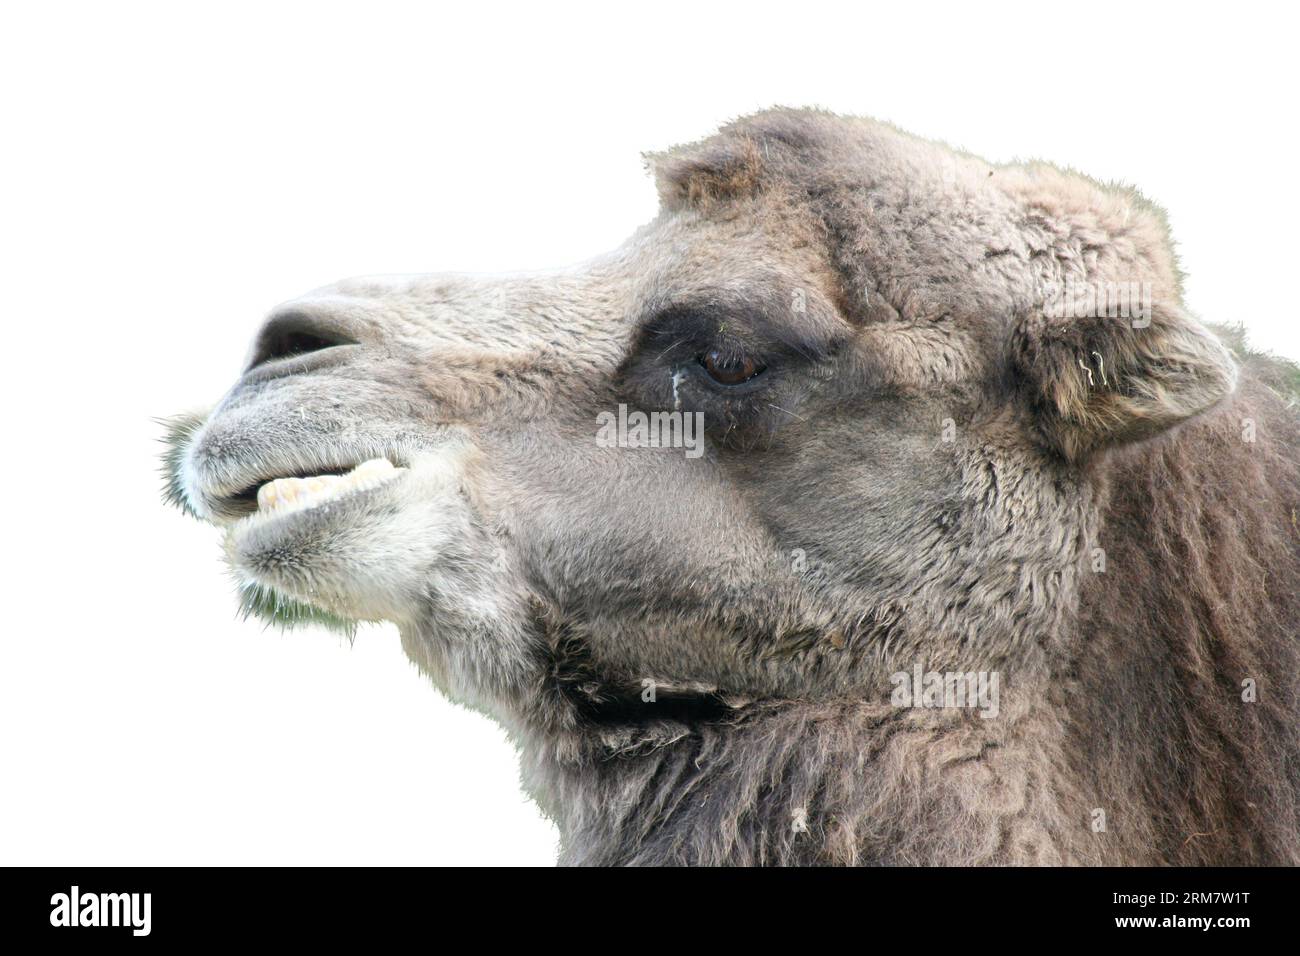 A camel (Camelidae) portrait seen from the side Stock Photo